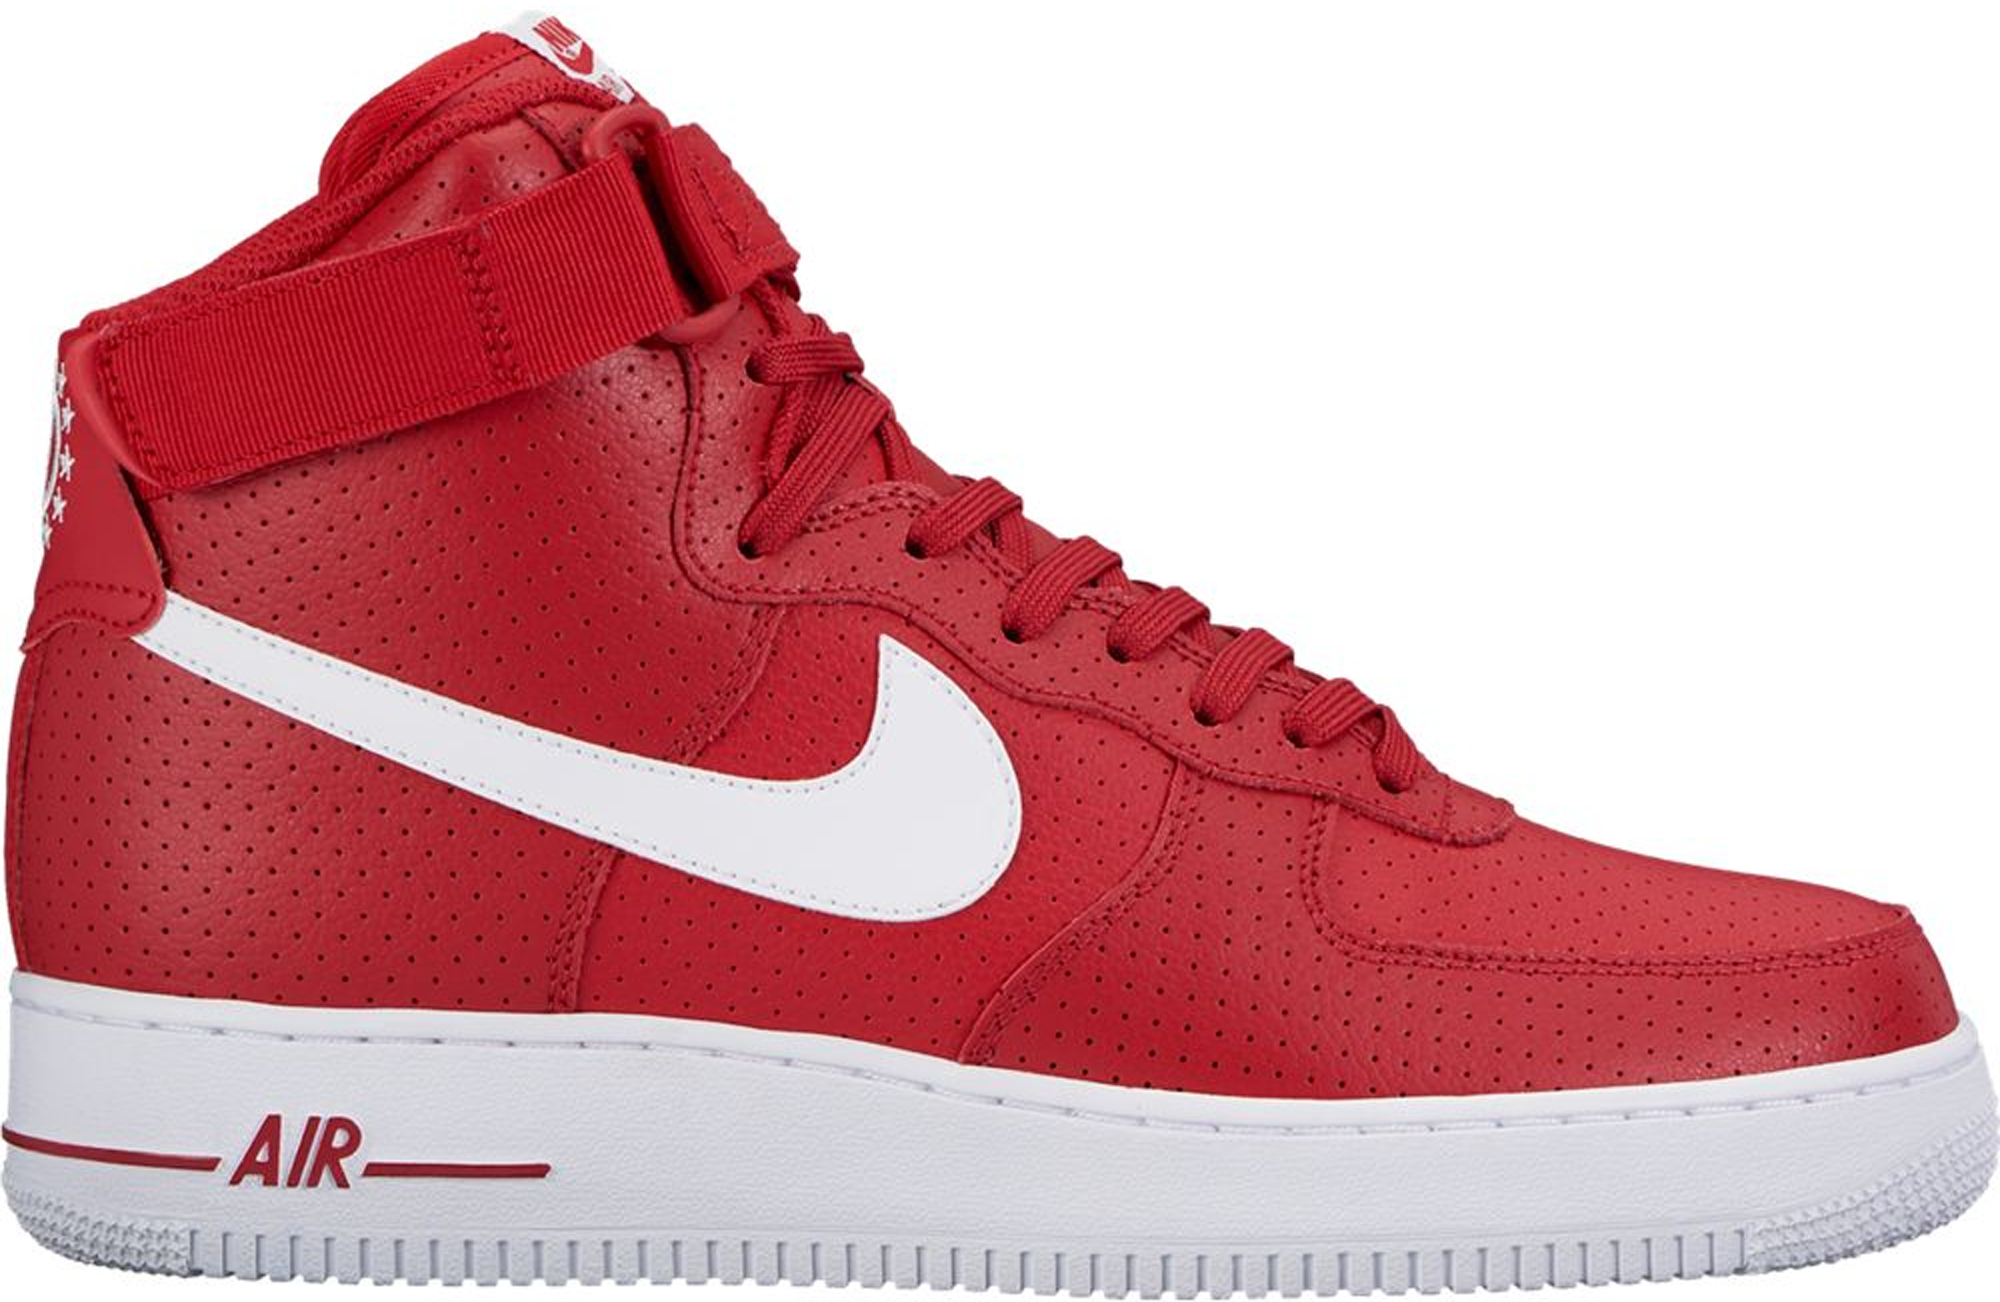 all red high top air force ones